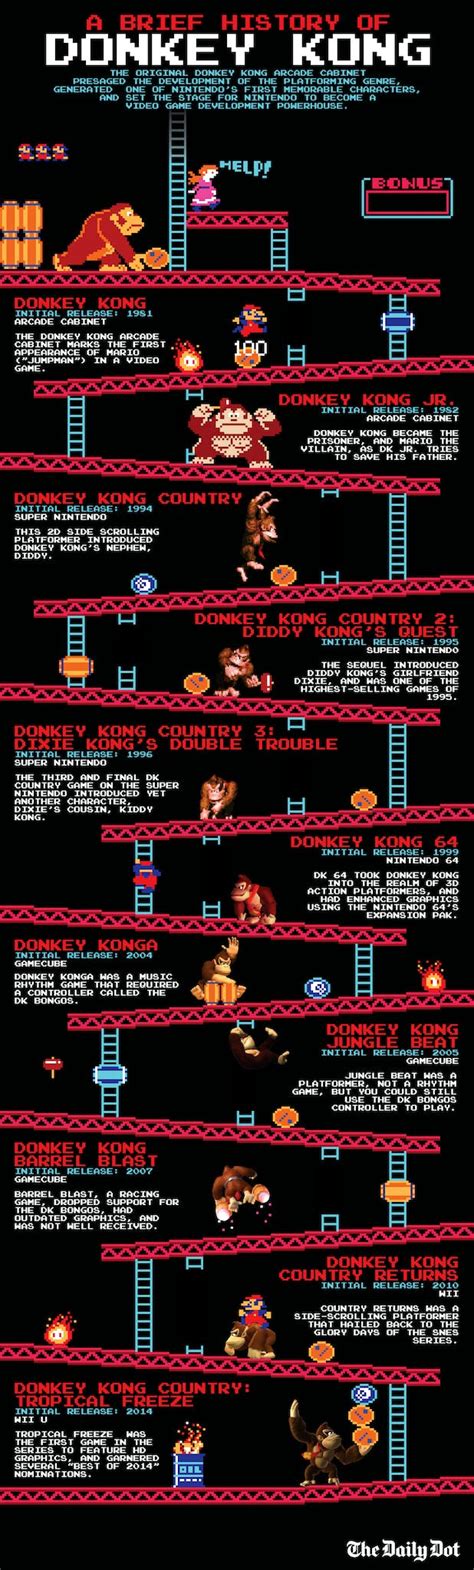 The History Of Donkey Kong In One Infographic